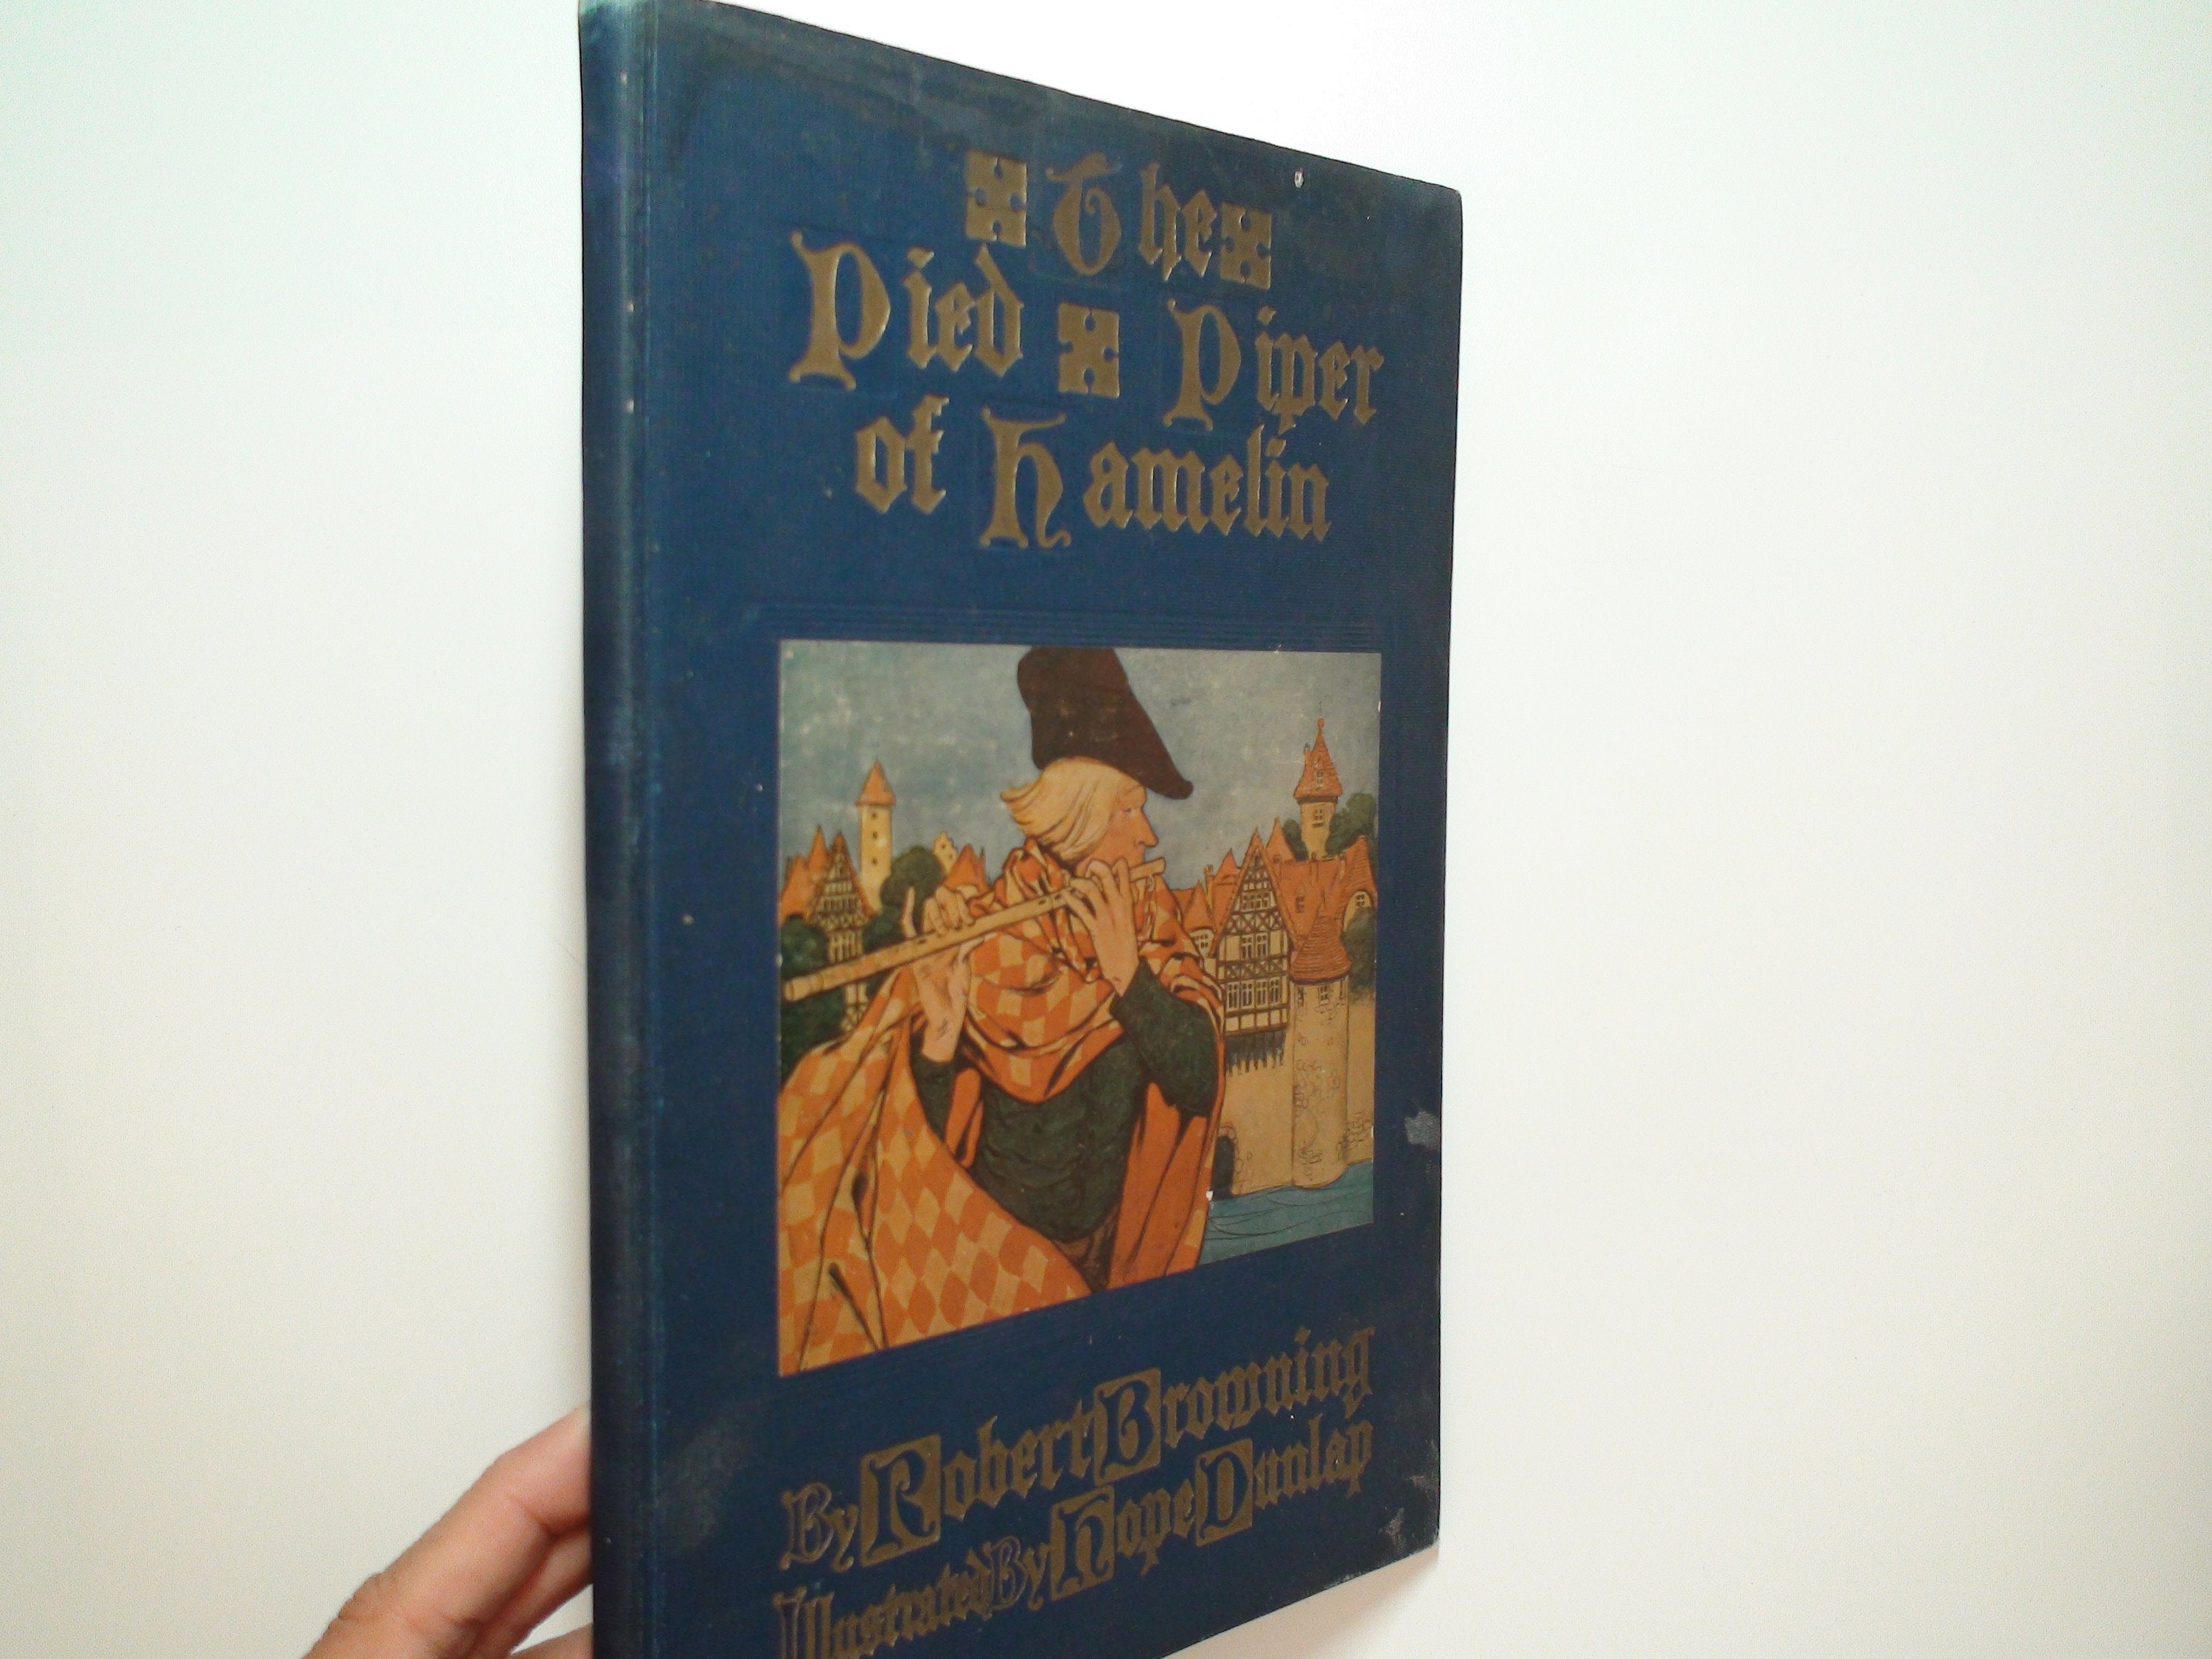 Pied Piper of Hamlin, Robert Browning, Illustrated by Hope Dunlap, 1st Ed, 1910